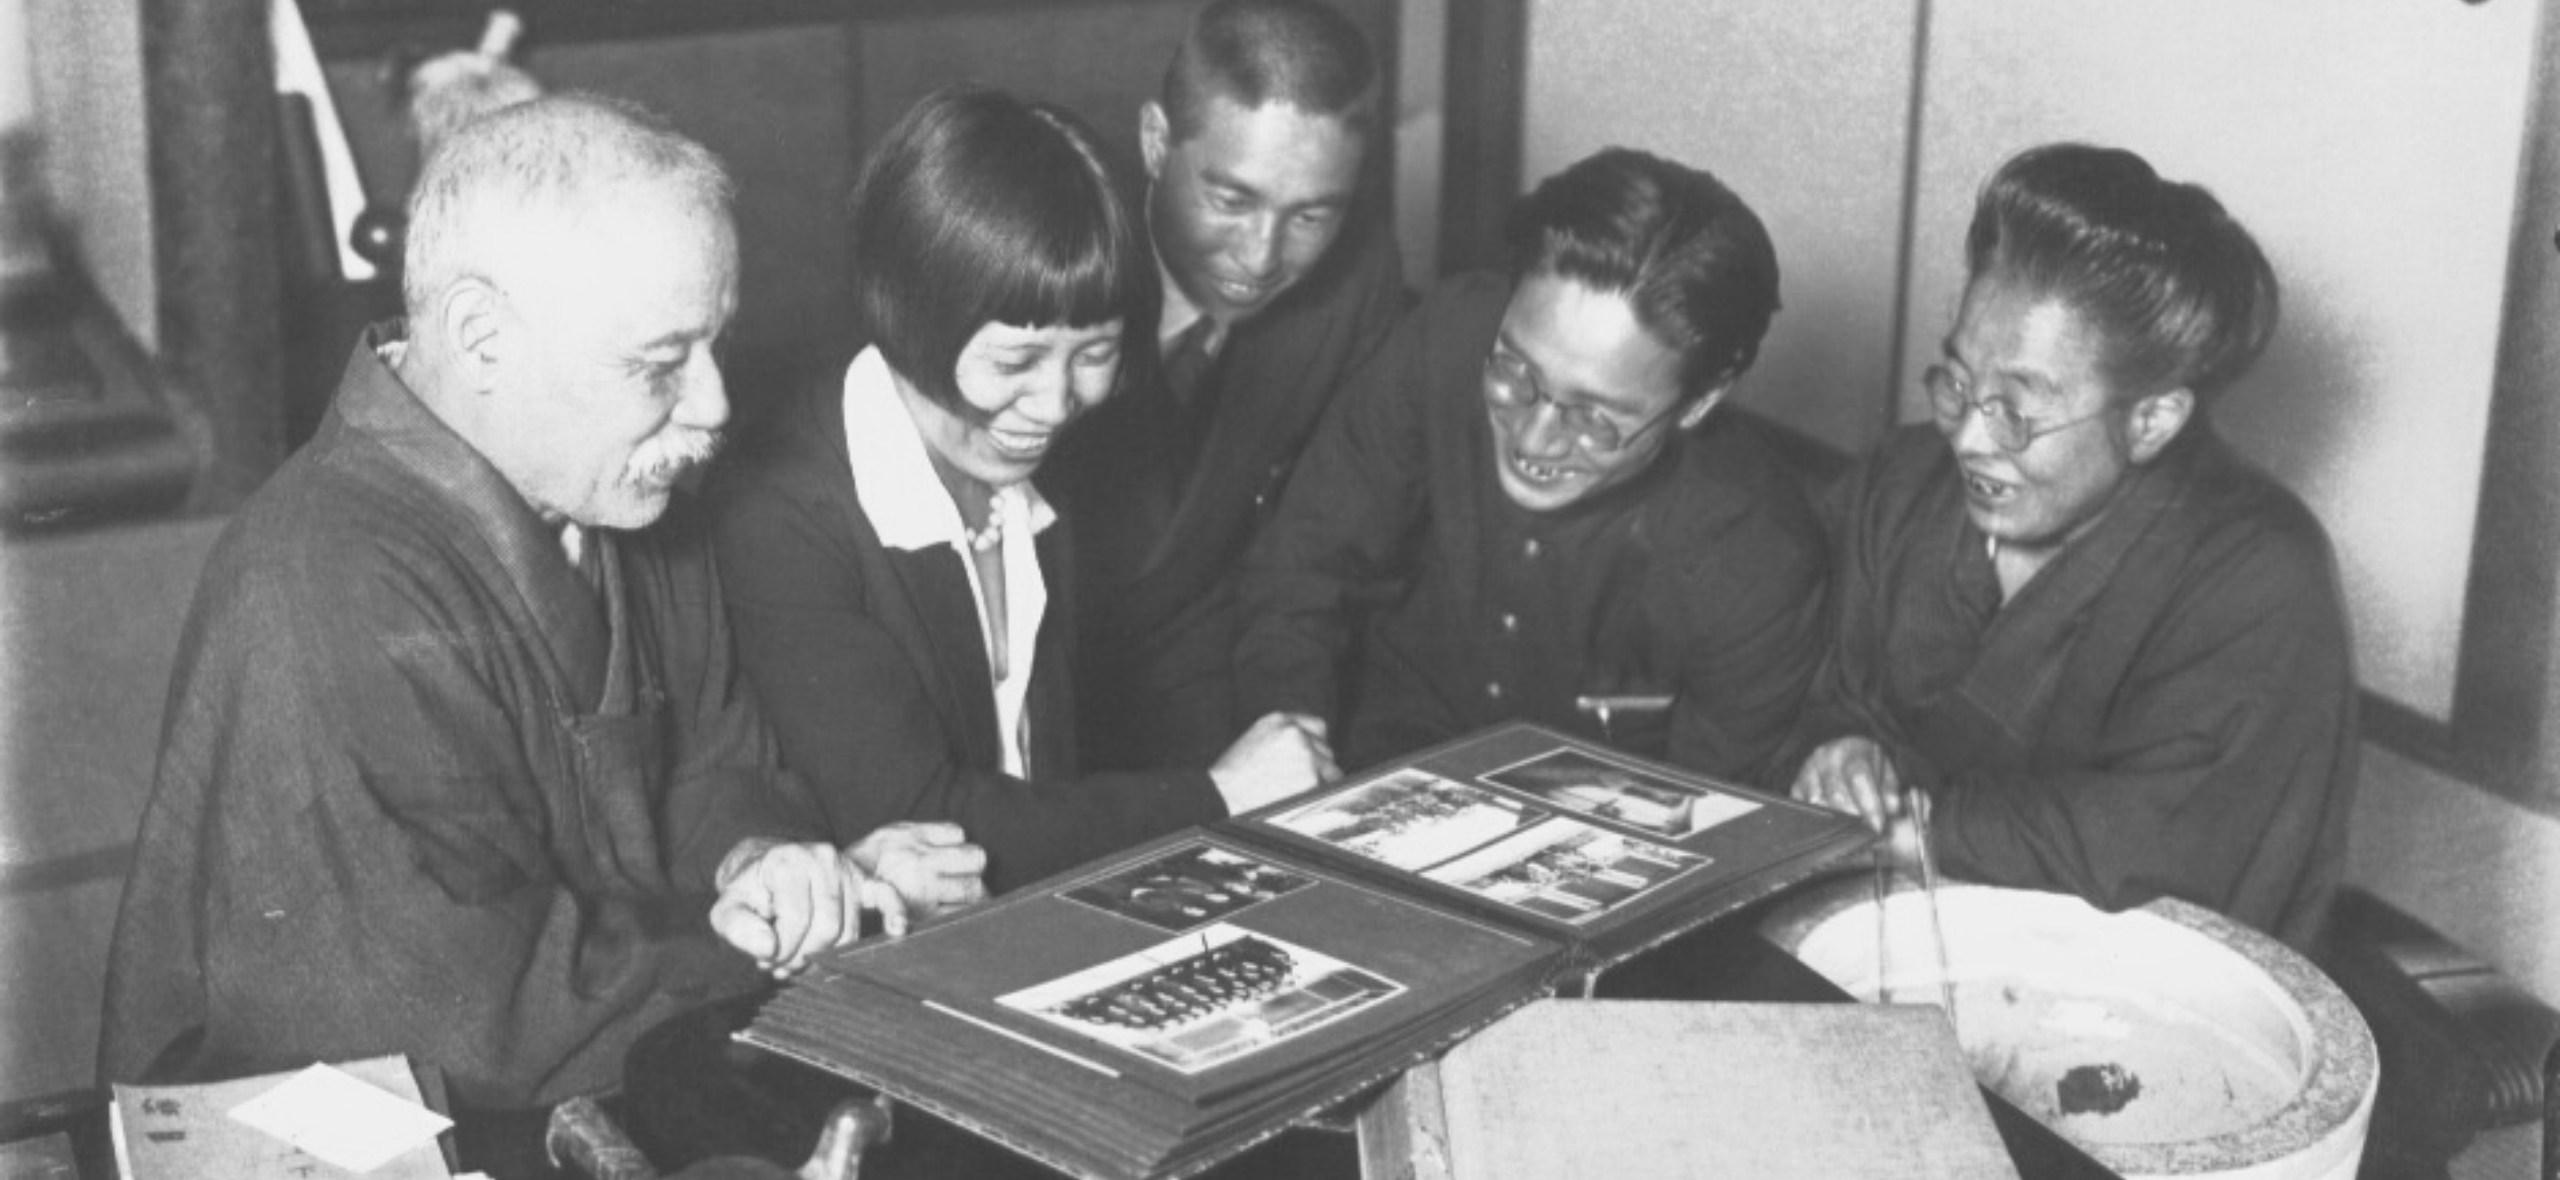 Japanese family huddles together looking at a photo album.